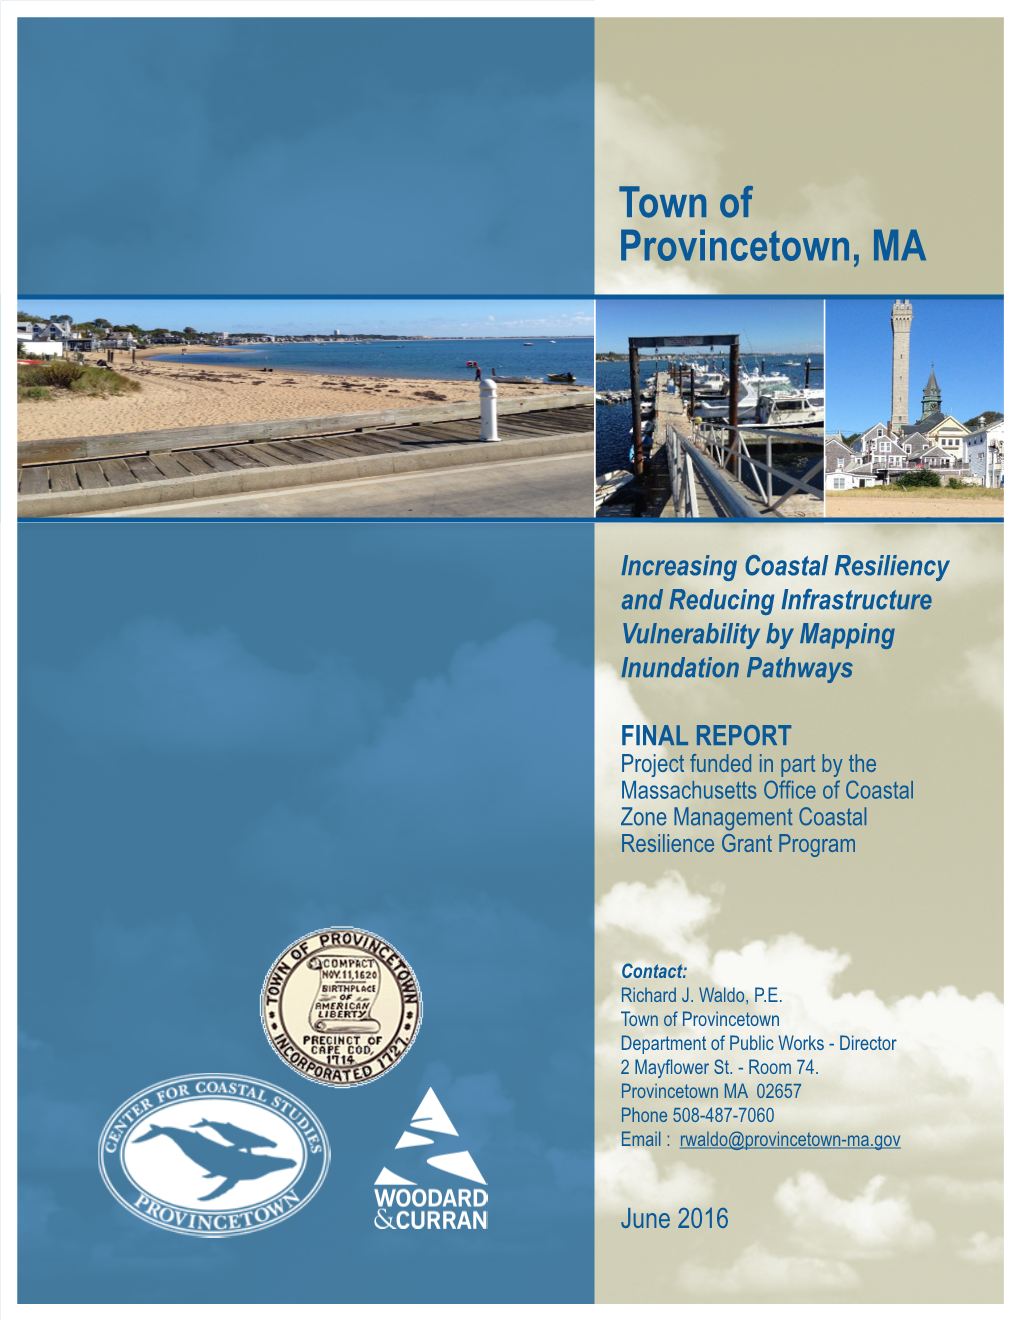 Increasing Coastal Resiliency and Reducing Infrastructure Vulnerability by Mapping Inundation Pathways FINAL REPORT